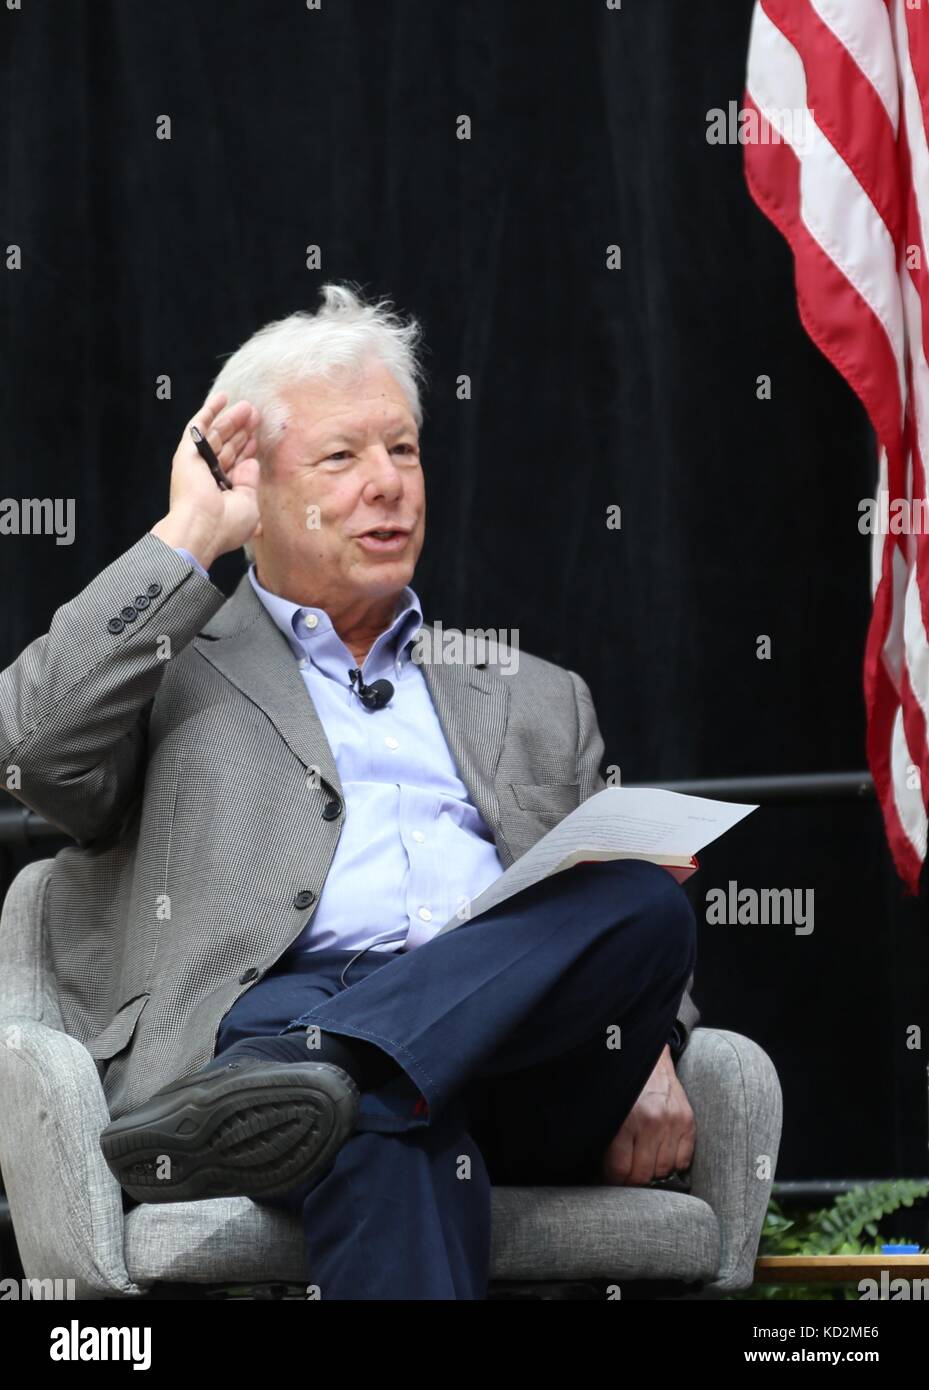 Chicago, USA. 9th Oct, 2017. Richard H. Thaler, 2017 Nobel Prize winner in Economics, speaks during a press conference at University of Chicago Booth School of Business in Chicago, the United States, on Oct. 9, 2017. The 2017 Nobel Prize in Economics was awarded to Richard H. Thaler 'for his contributions to behavioural economics,' announced the Royal Swedish Academy of Sciences on Monday. Credit: Wang Qiang/Xinhua/Alamy Live News Stock Photo